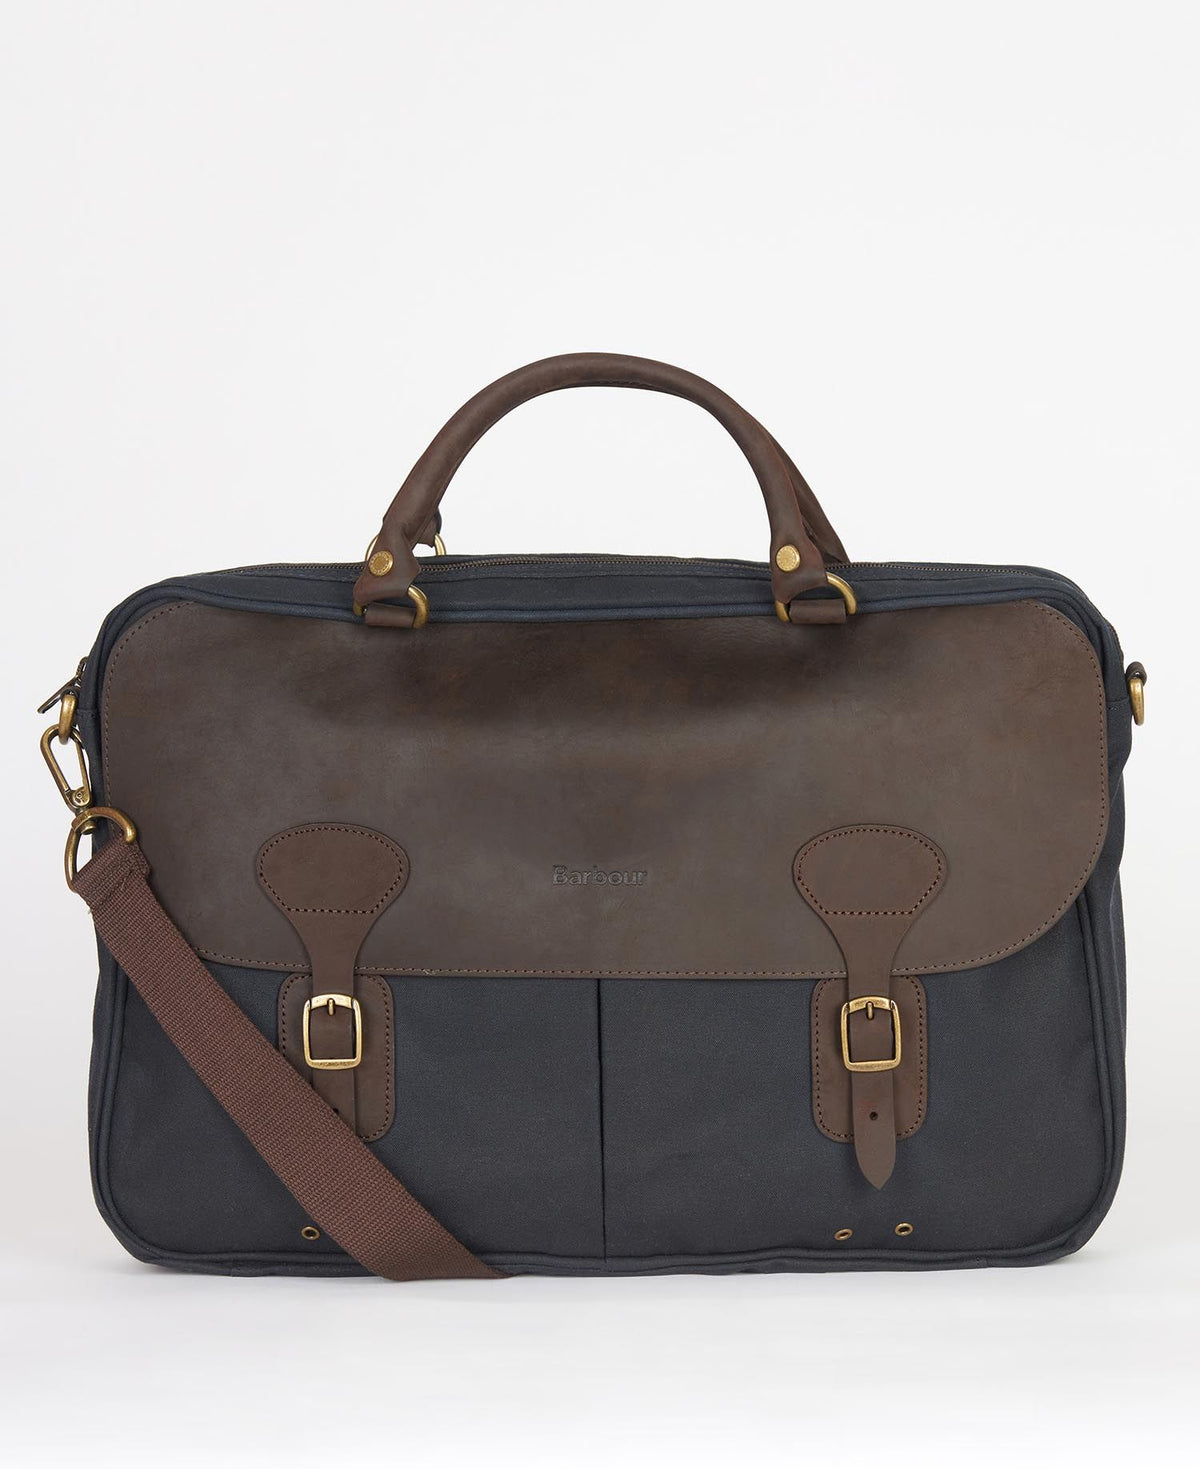 Barbour Wax Leather Briefcase, 01, Uba0004, Navy